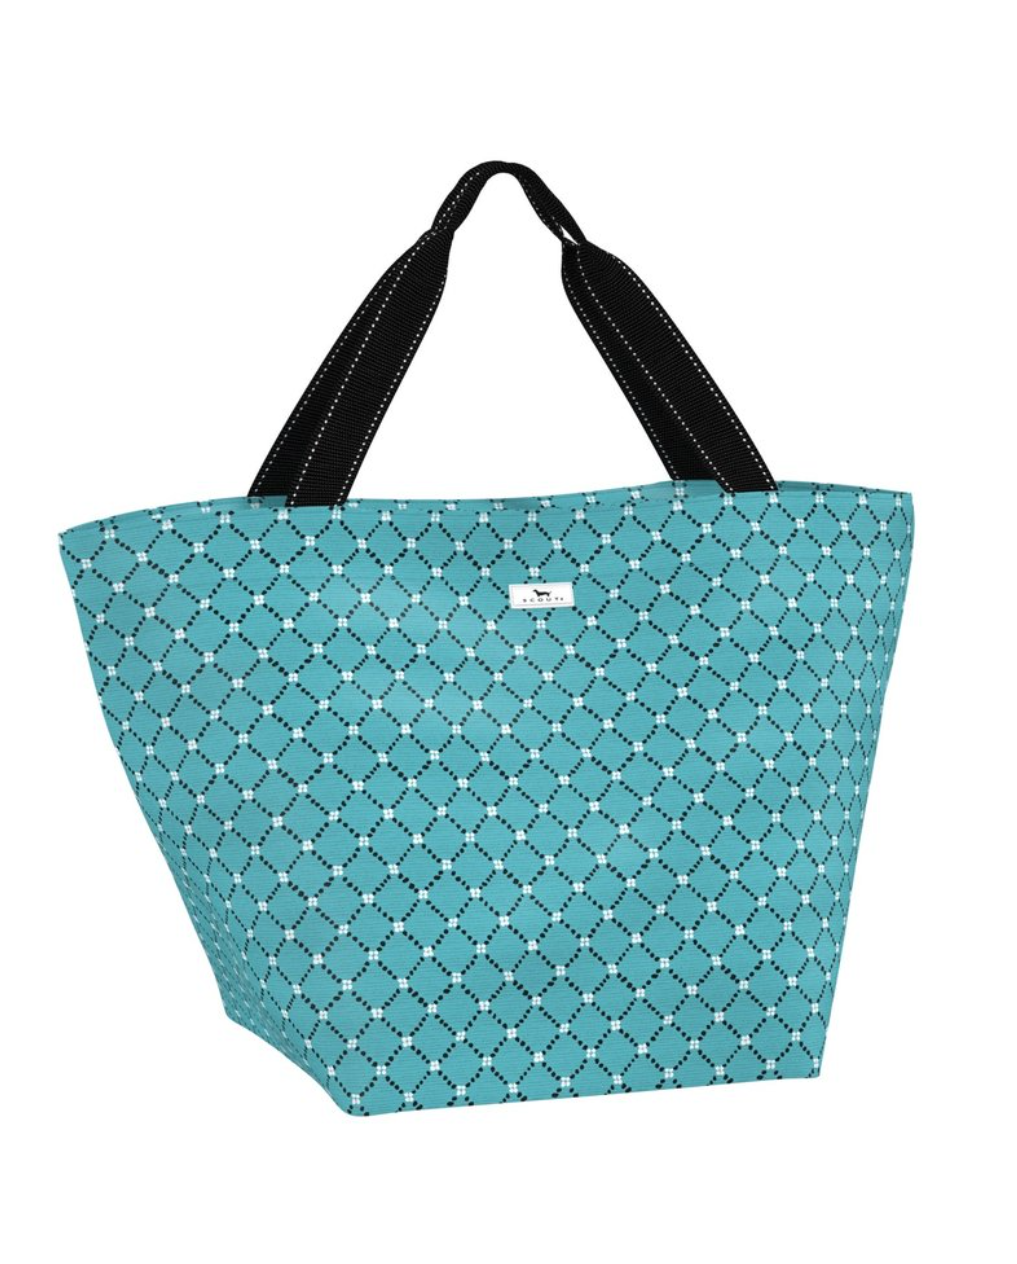 Scout Weekender Tote Luggage, Totes in Stitch Please at Wrapsody